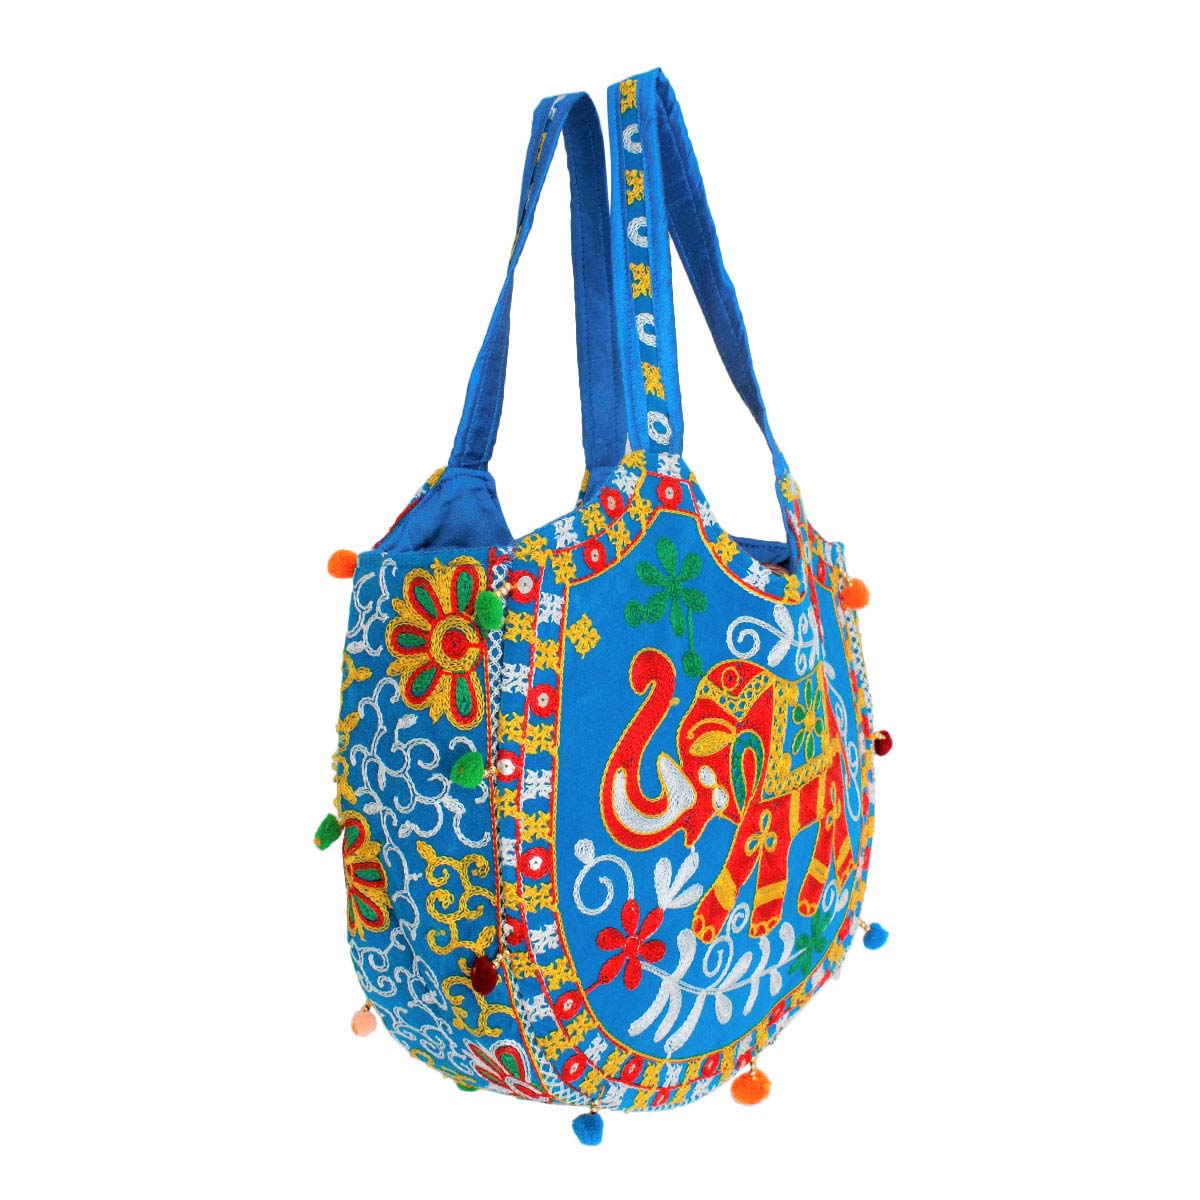 Blue Embroidered Elephant Tote